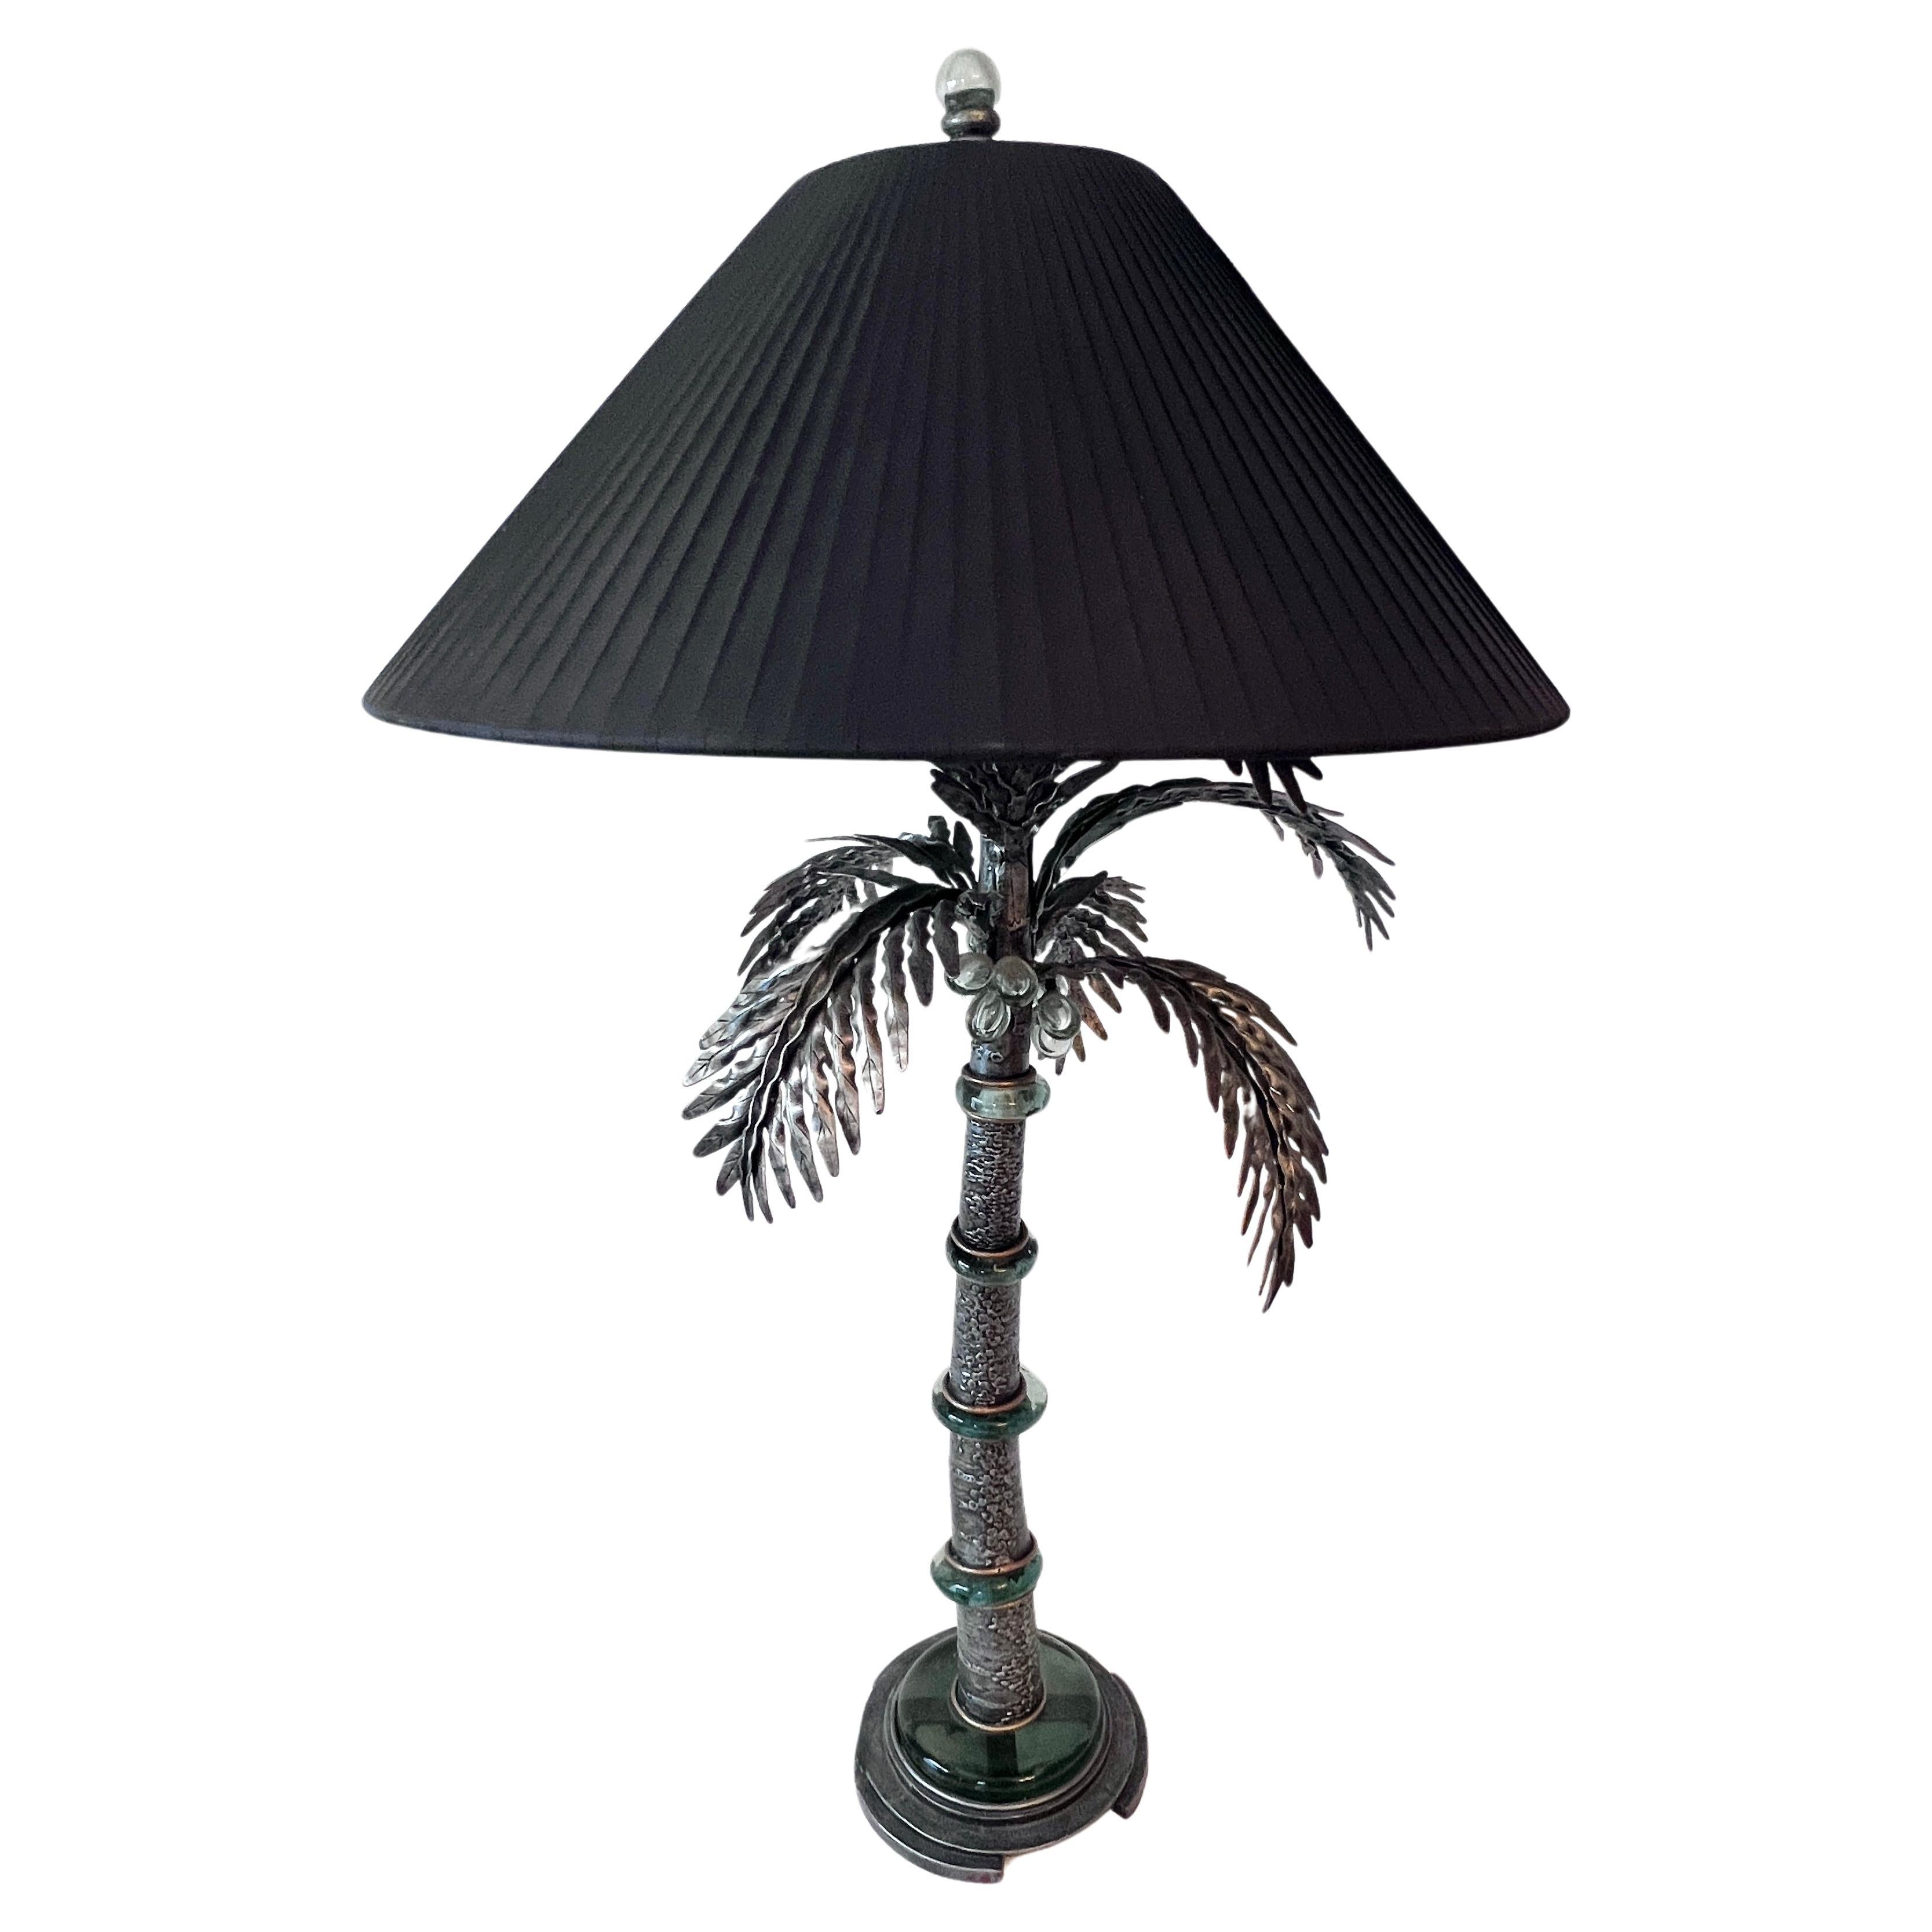 Table Lamp the shape of a Palm Tree with Art Glass Disks and Metal Metal Fronds